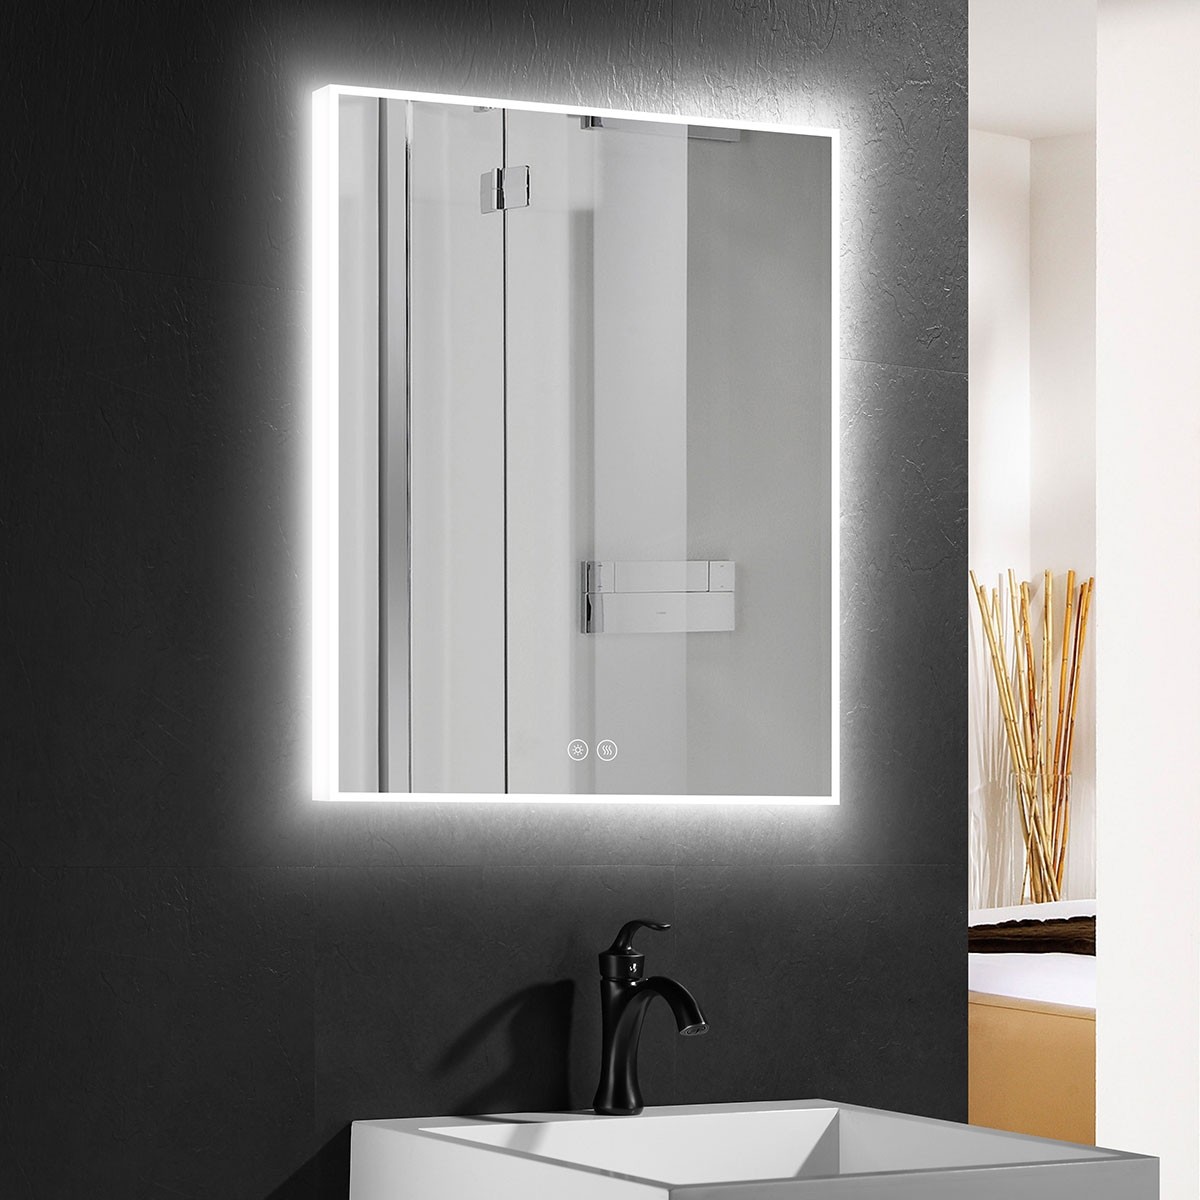 DECORAPORT 24 x 32 Inch LED Bathroom Mirror with Touch Button,Anti Fog, Dimmable, Vertical & Horizontal Mount (EH-2432)